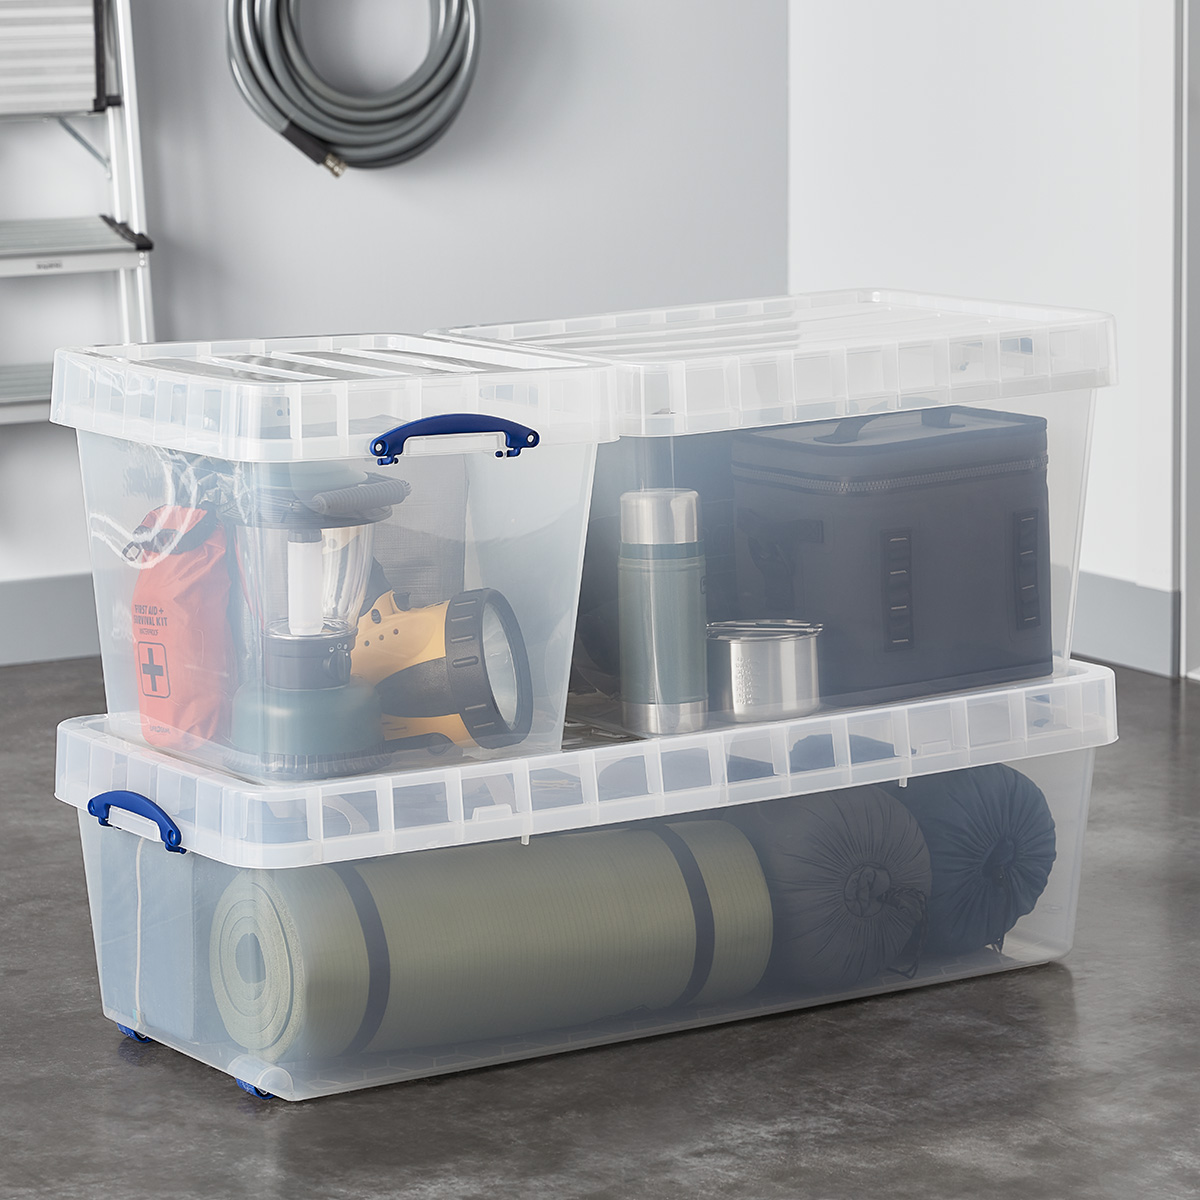 https://www.containerstore.com/catalogimages/439379/10081543g_XL_Premier_modular_Tote_cl.jpg